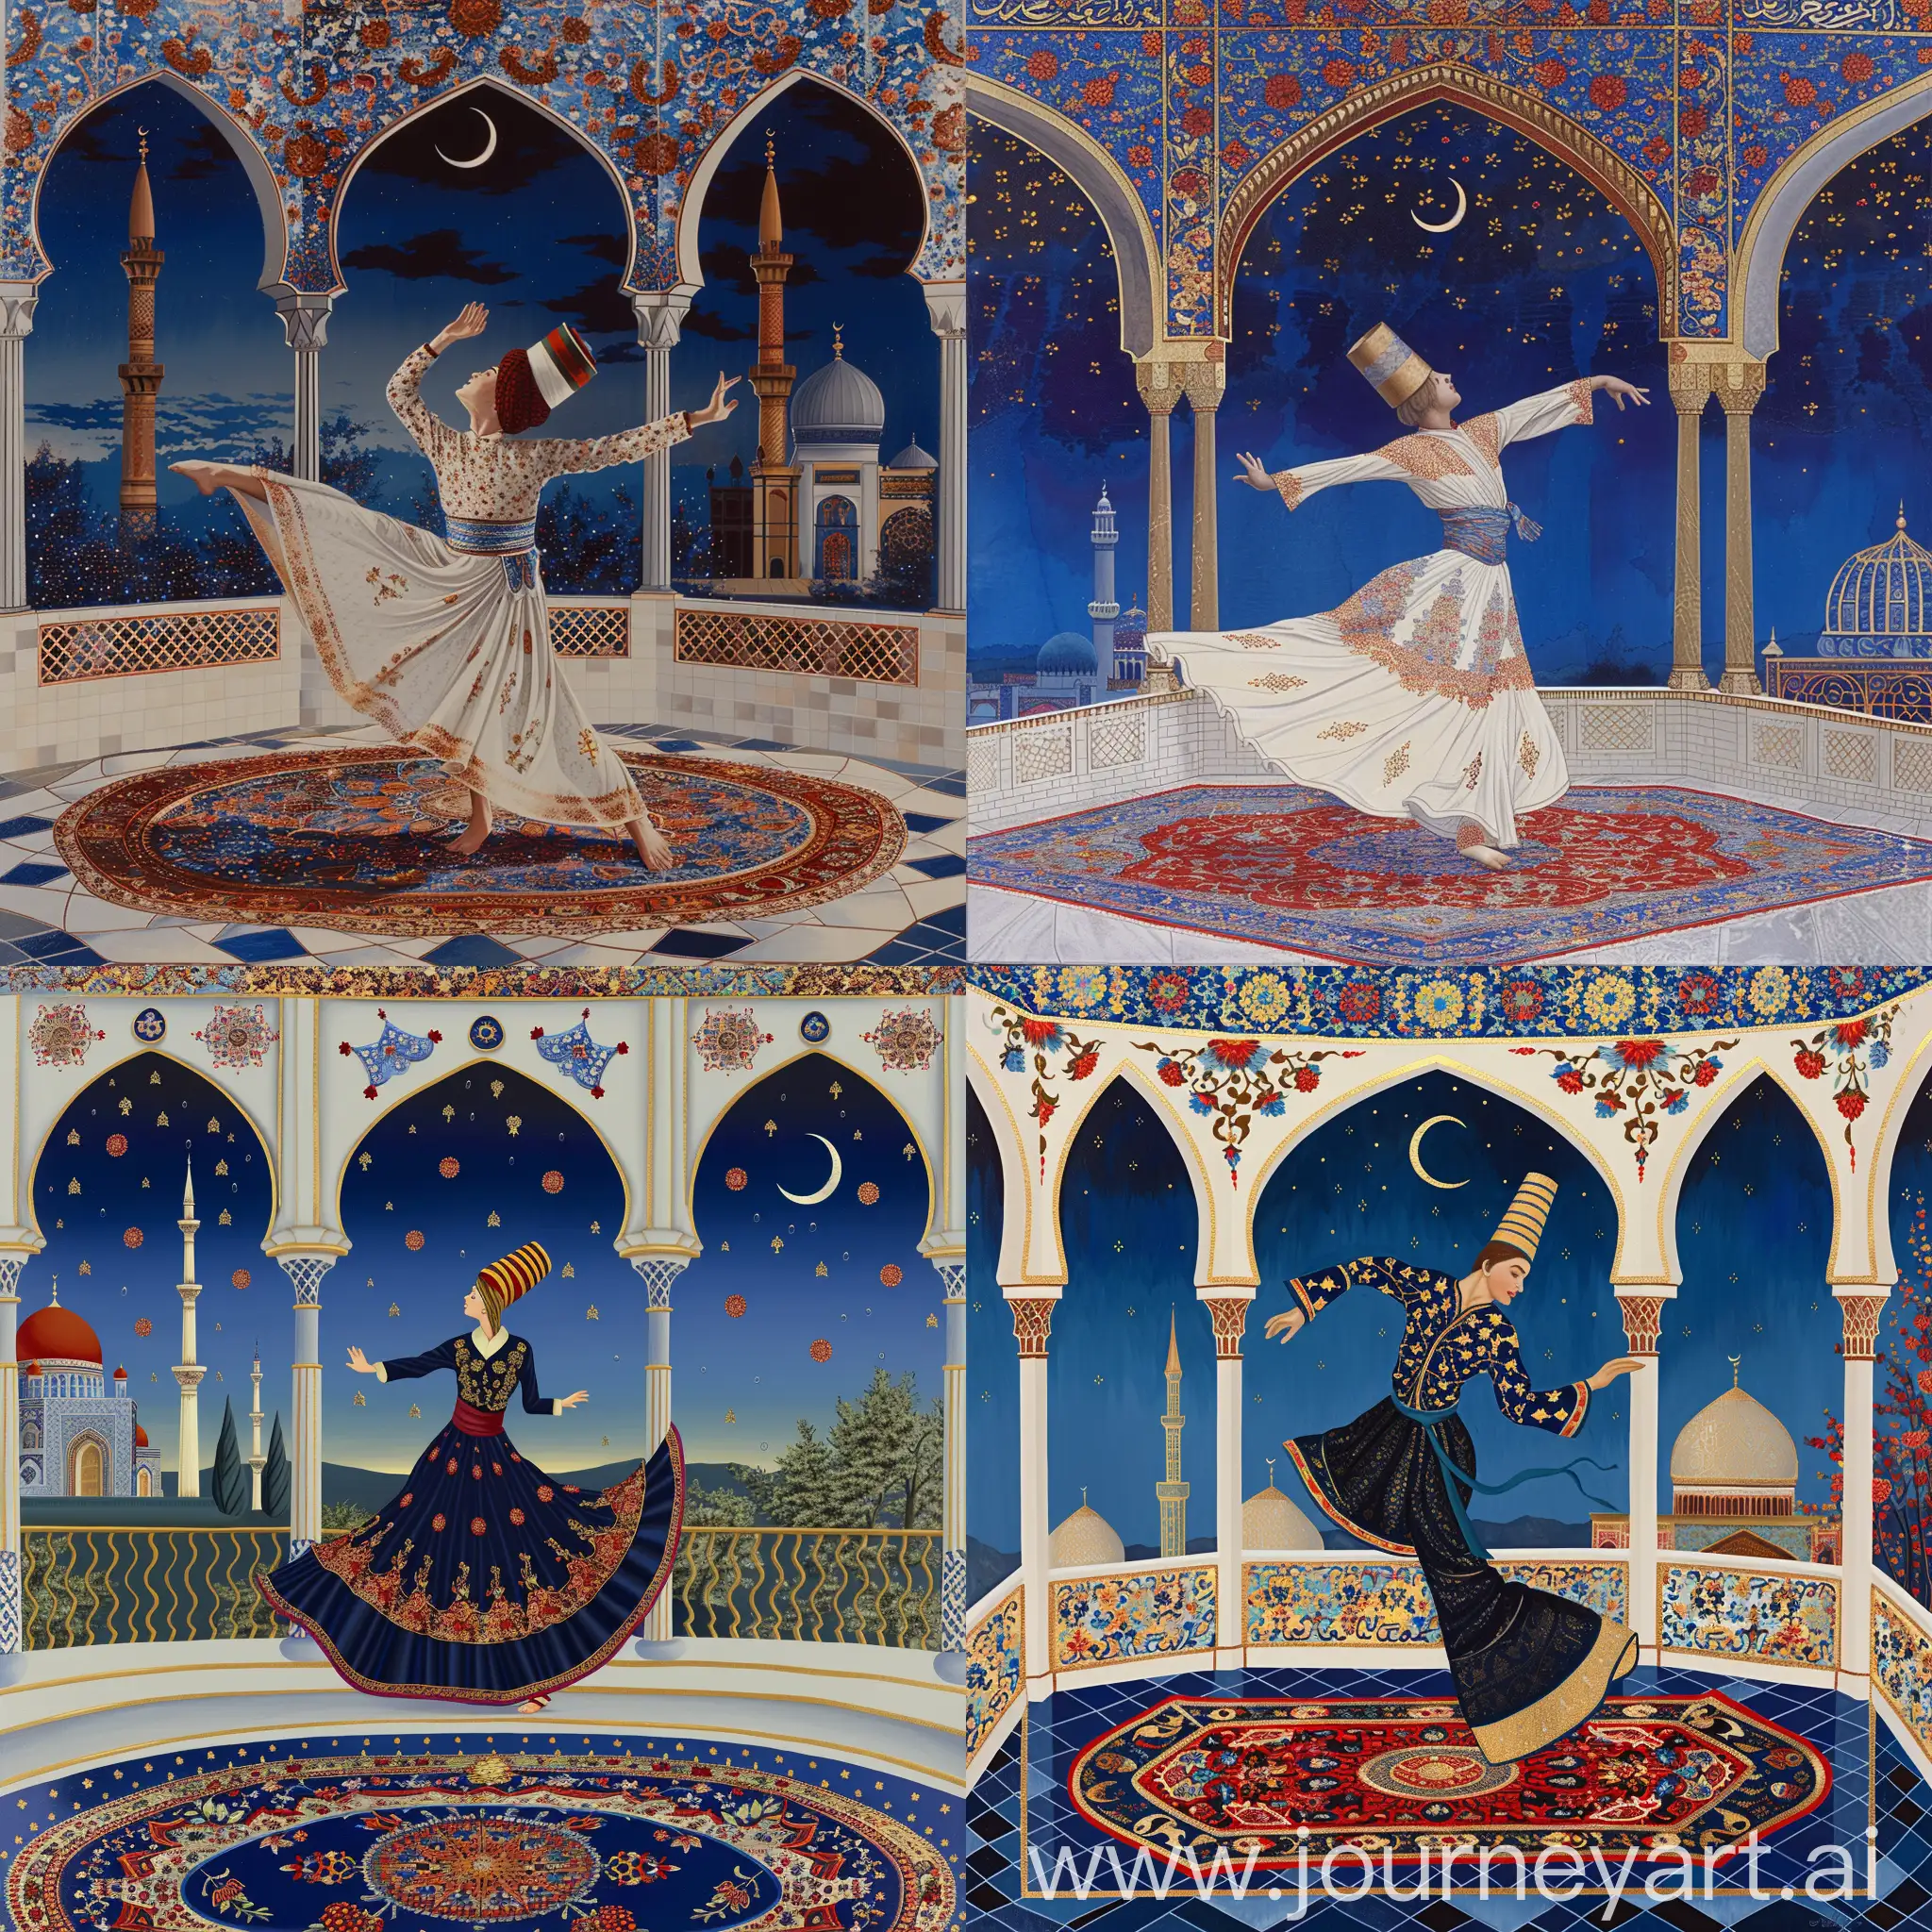 British-Dervish-Performing-Sufi-Whirling-Dance-on-Persian-Carpet-in-Octagonal-Balcony